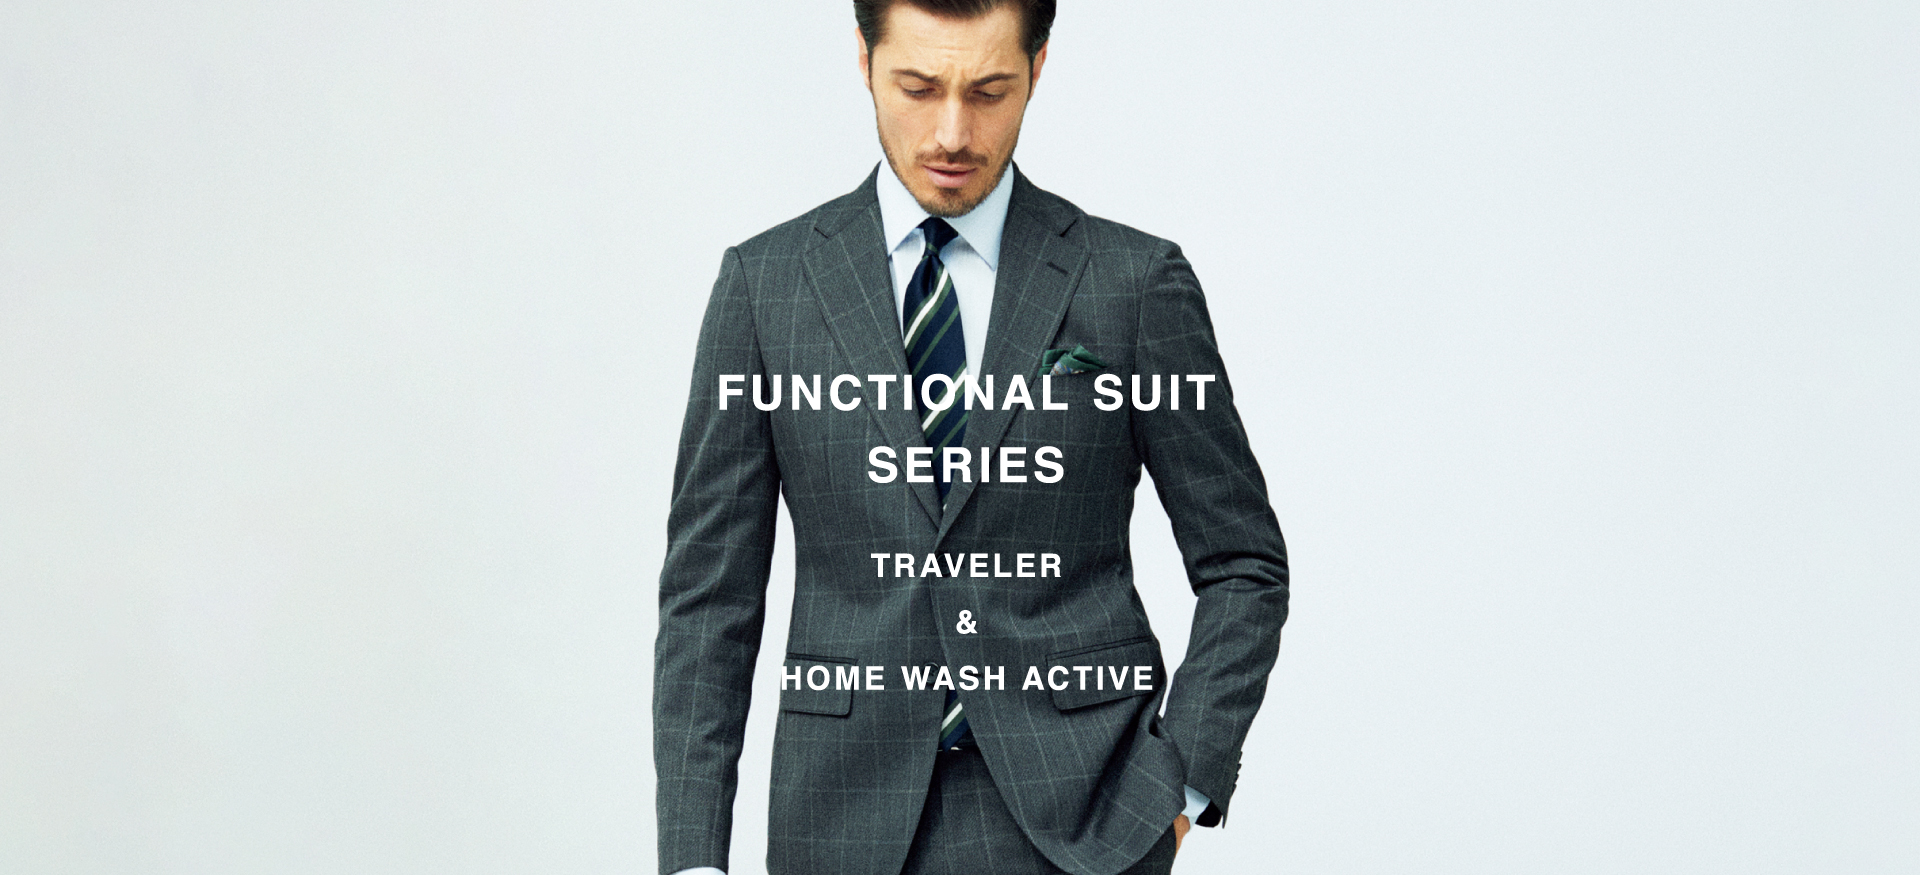 FUNCTIONAL SUIT SERIES TRAVELER & HOME WASH ACTIVE